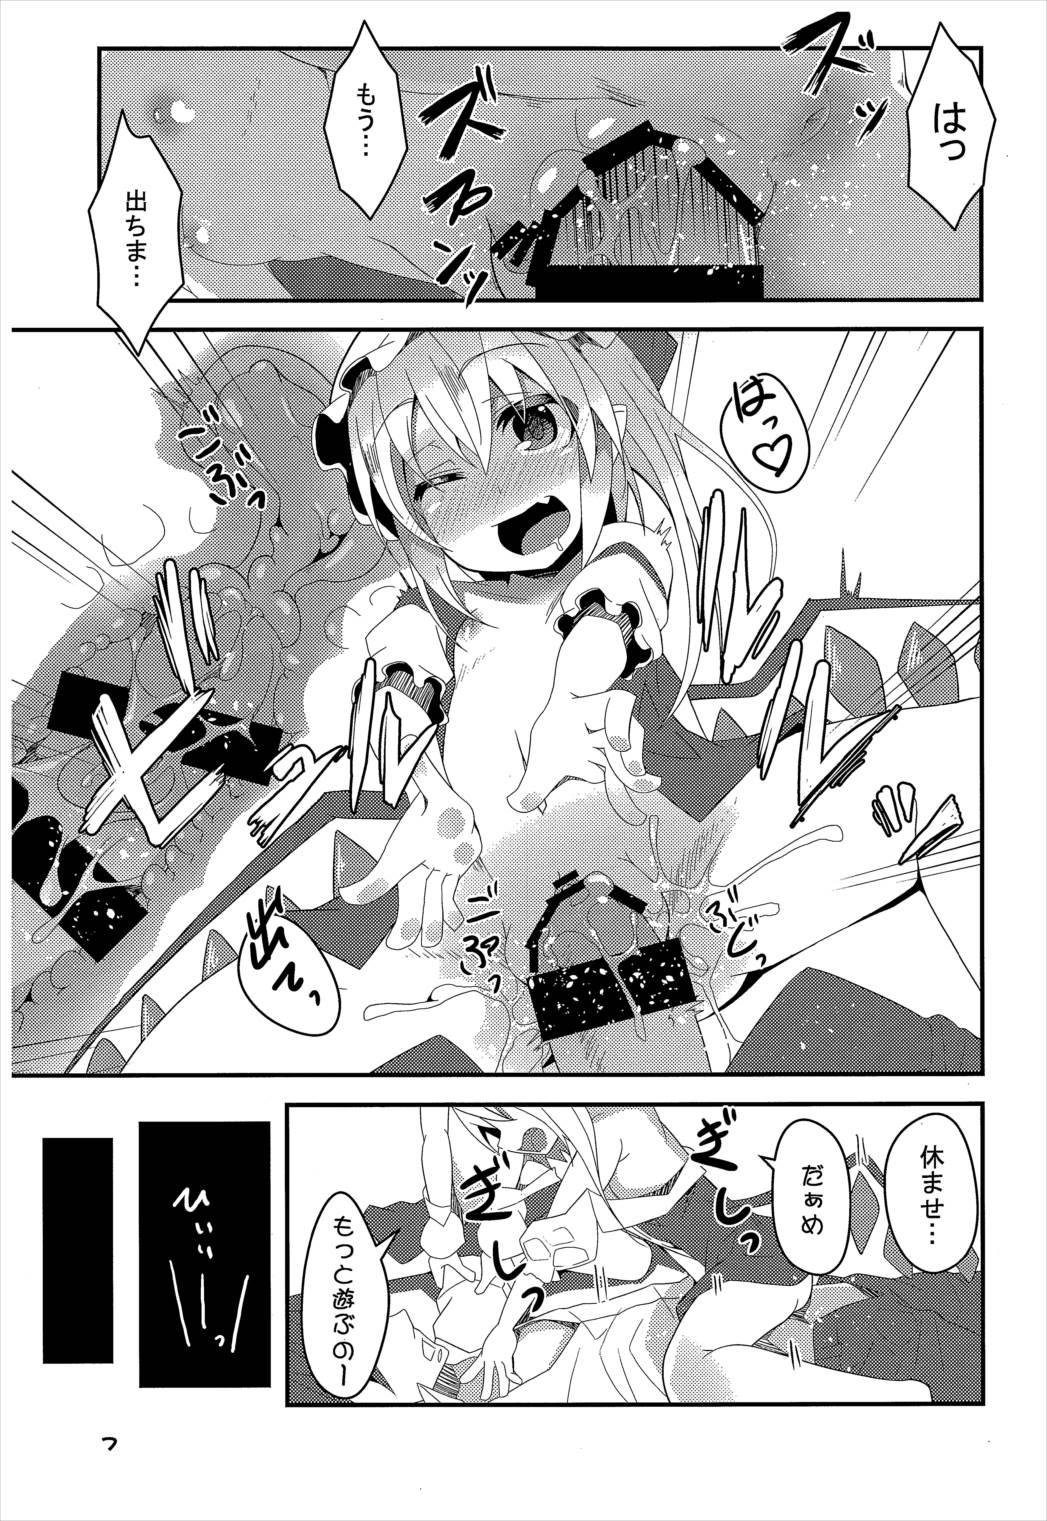 Point Of View Four of Flan-chan no Gyakushuu - Touhou project Atm - Page 6